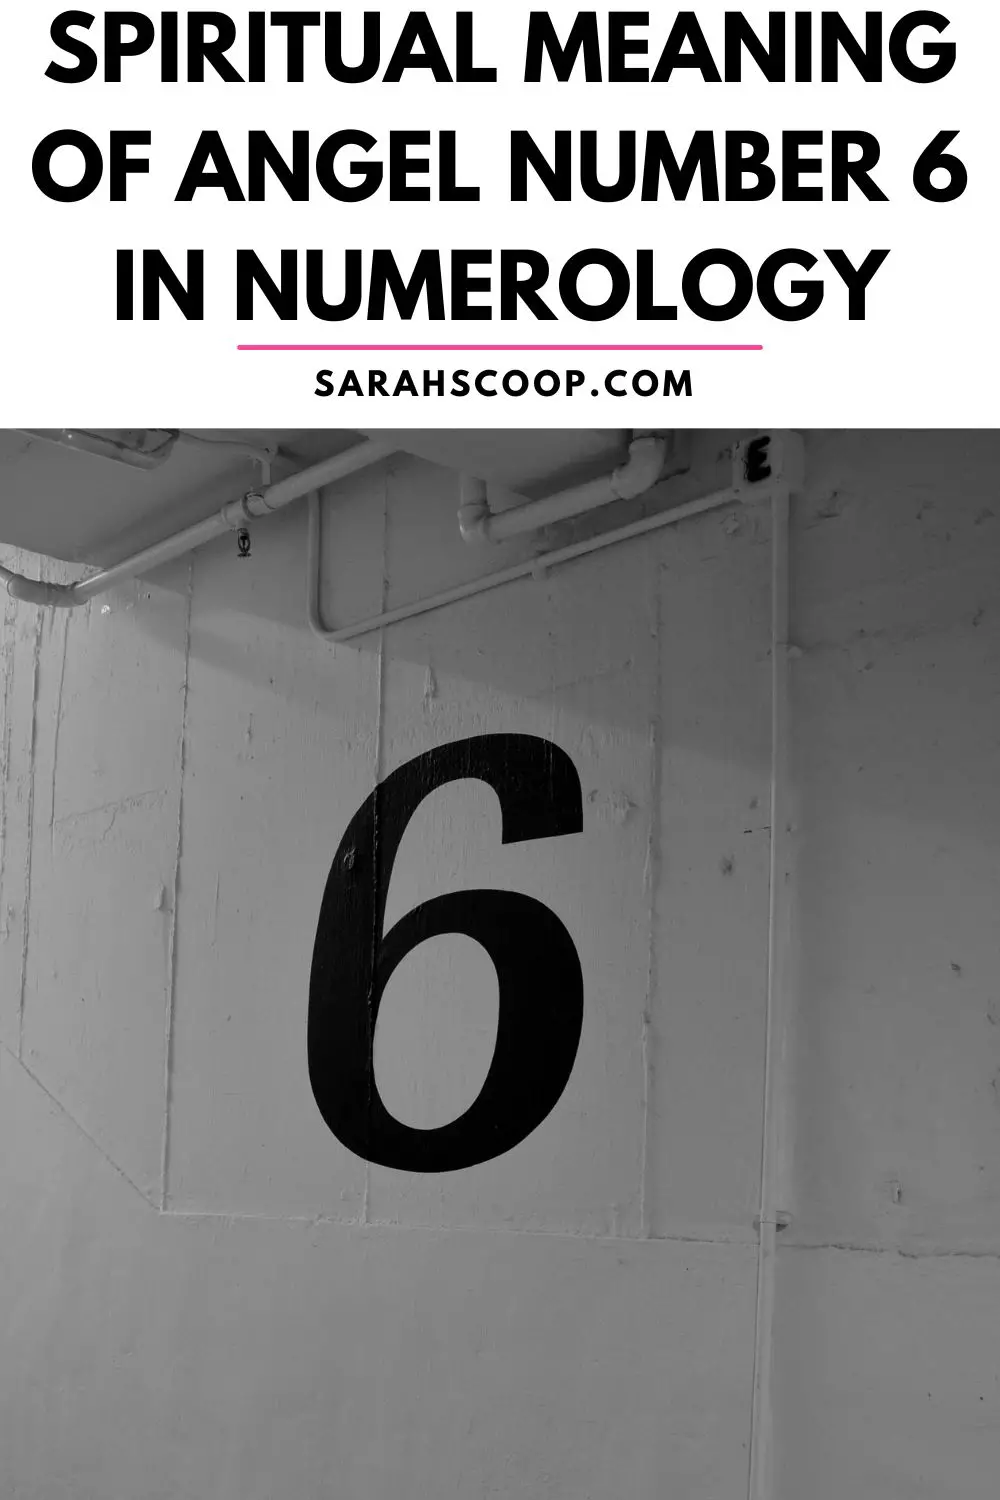 How The Number 6 Can Influence Your Life